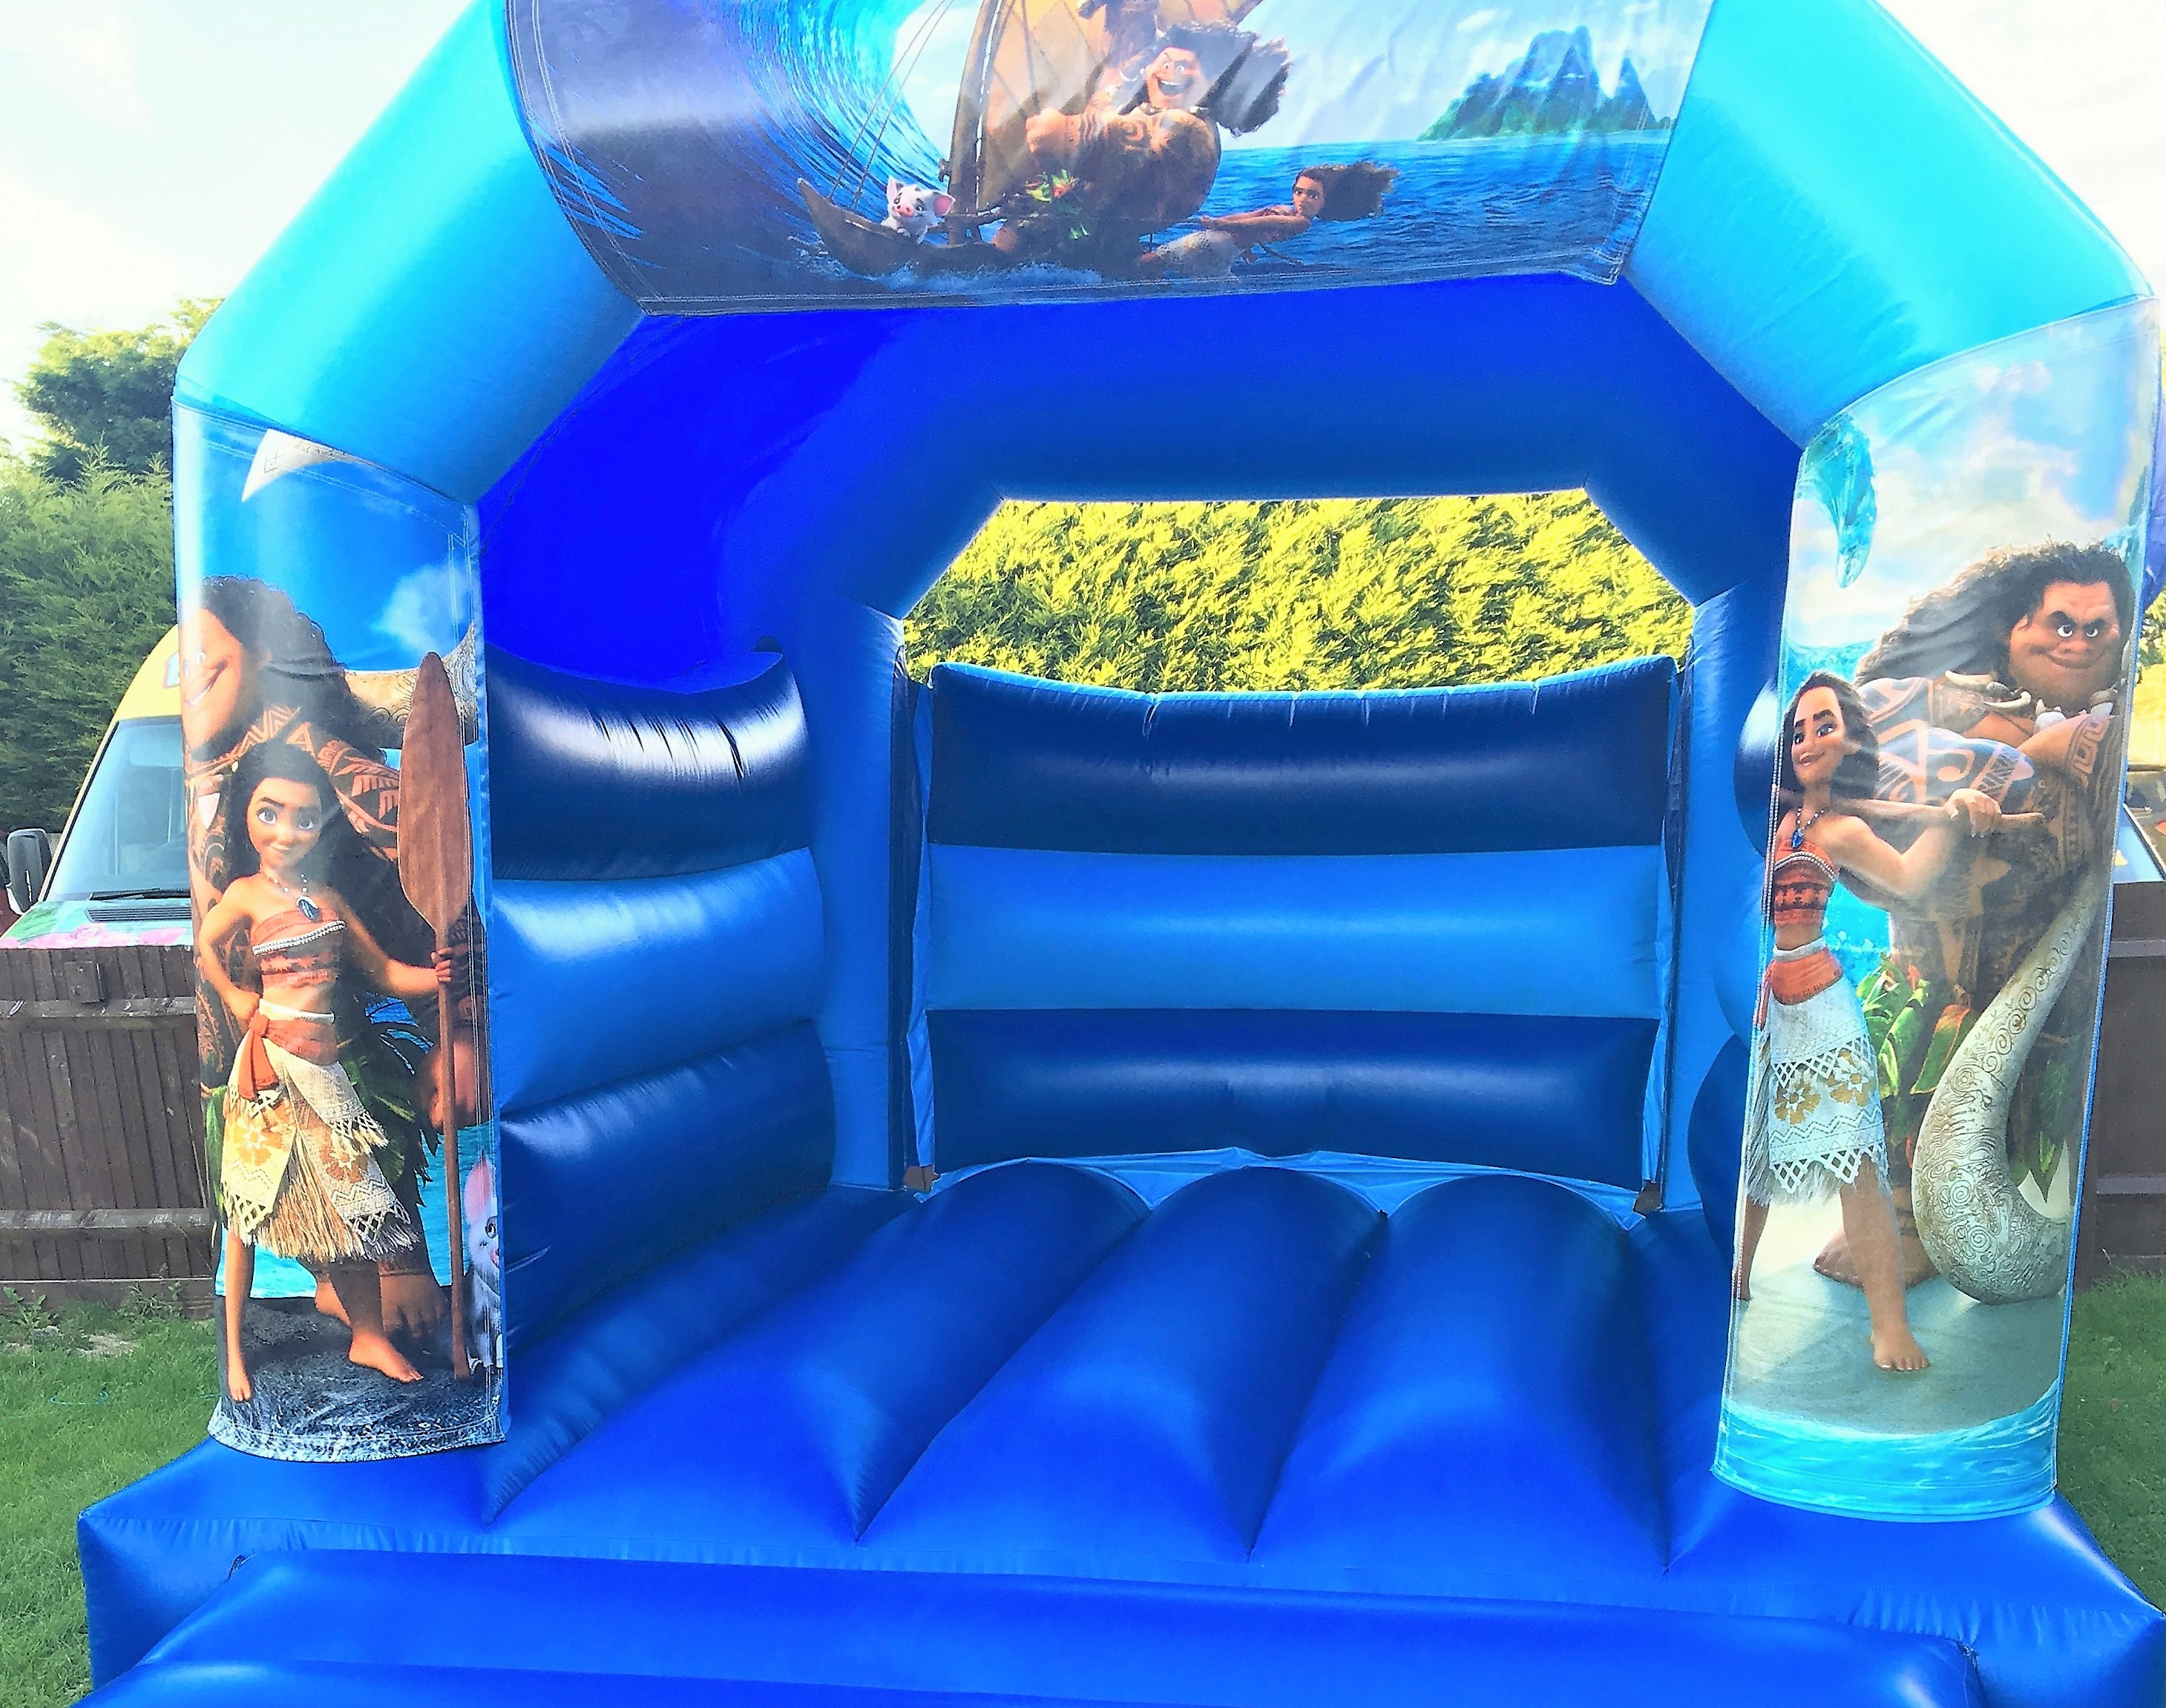 Bouncy Castle Hire And Event Hire In Surrey And Kent Including Croydon Bromley Sevenoaks Bexley Beckenham More Bj S Bouncy Castles Hire